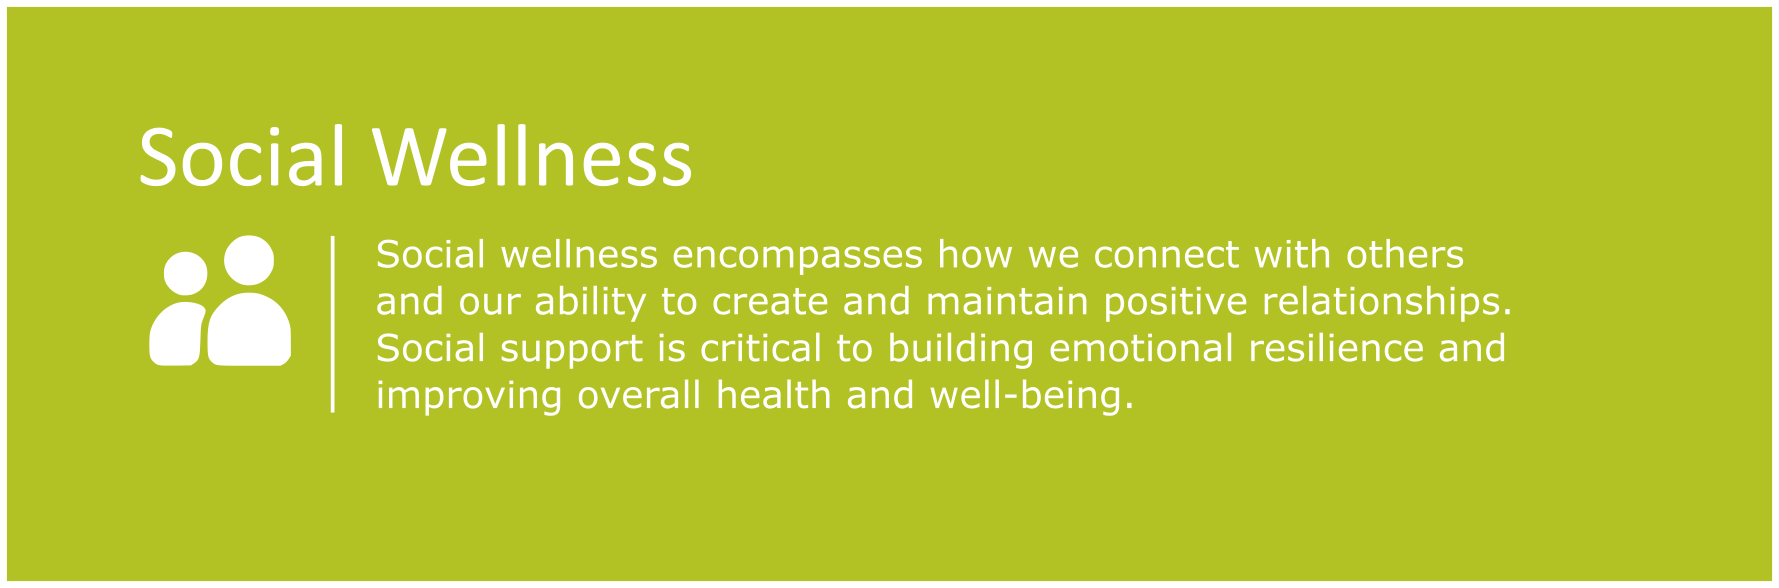 Social wellness encompasses how we connect with others and our ability to create and maintain positive relationships. Social support is critical to building emotional resilience and improving overall health and well-being.